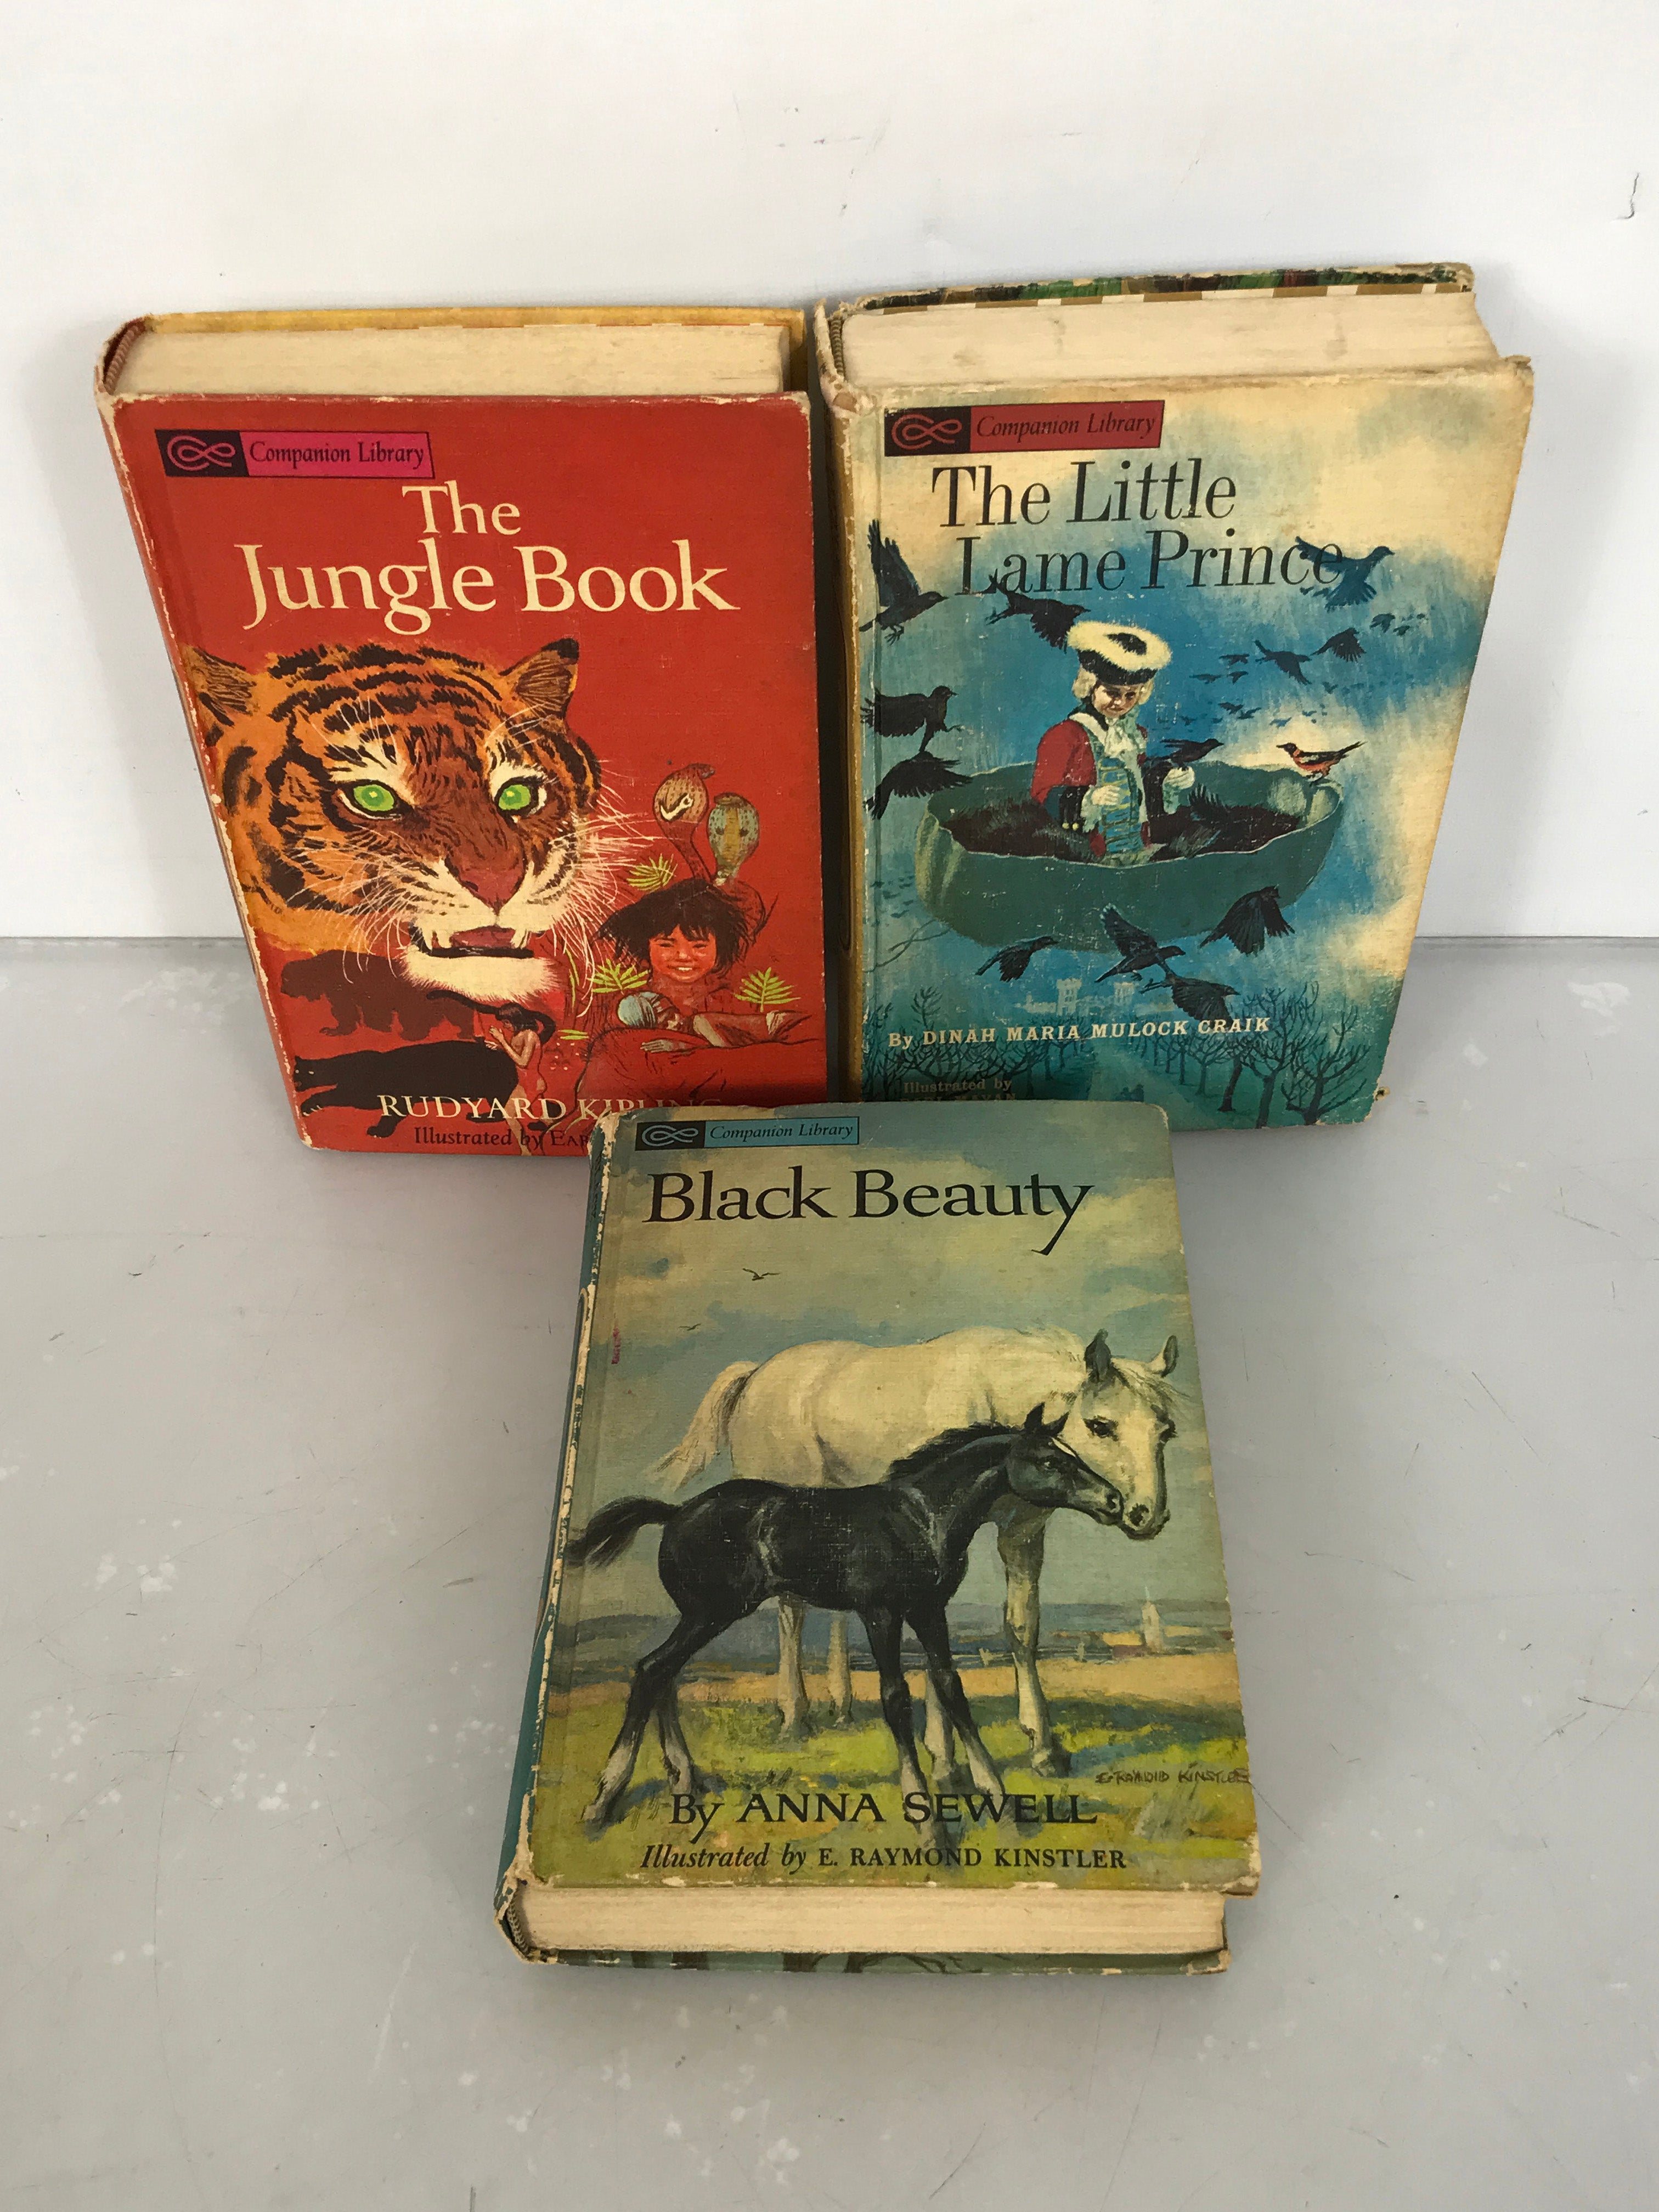 Lot of 3 Companion Library Classics The Wizard of Oz/The Jungle Book, Robin Hood/The Little Prince, and The Call of the Wild/Black Beauty HC